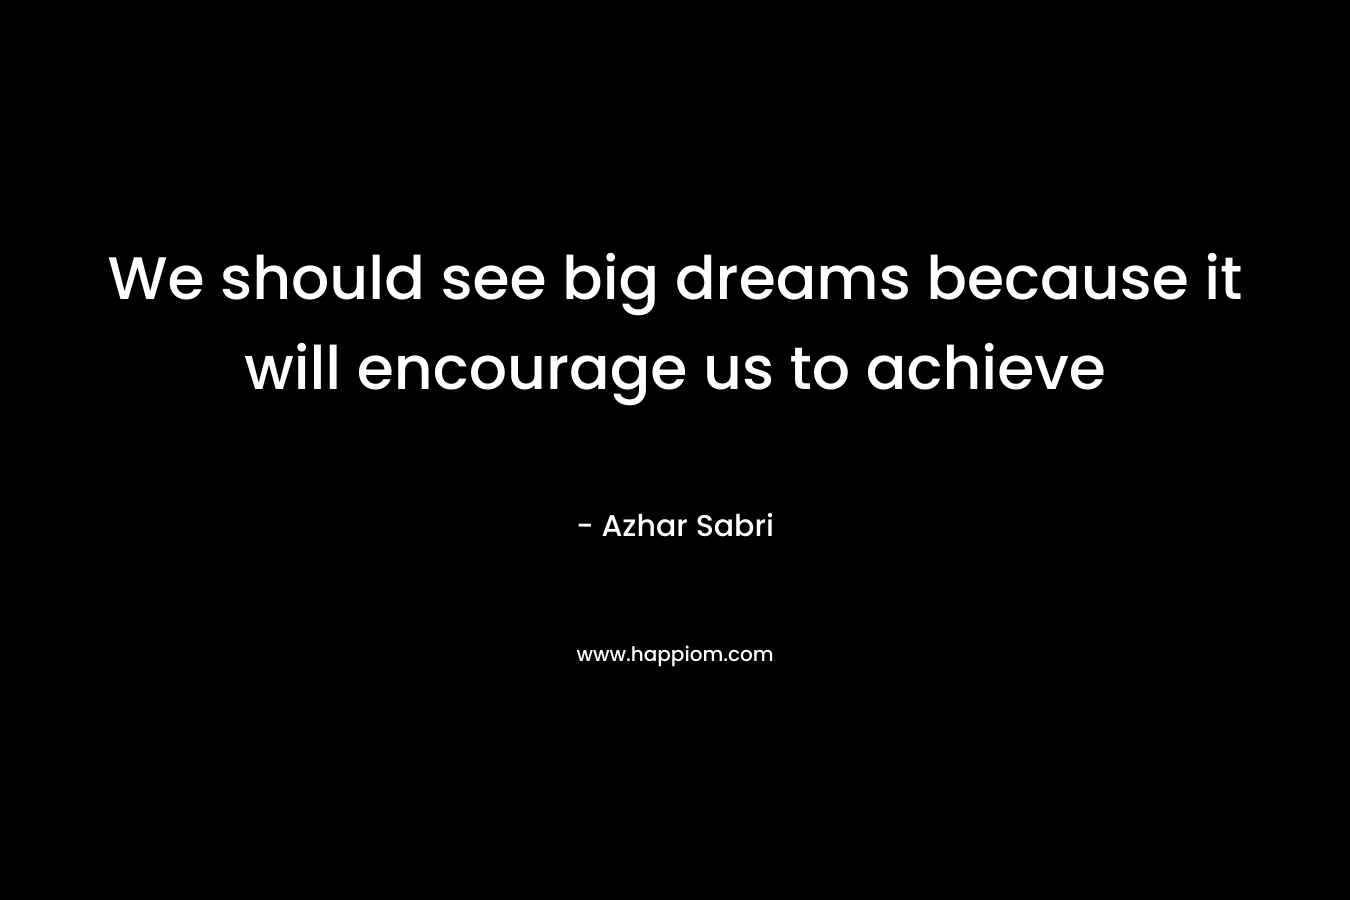 We should see big dreams because it will encourage us to achieve